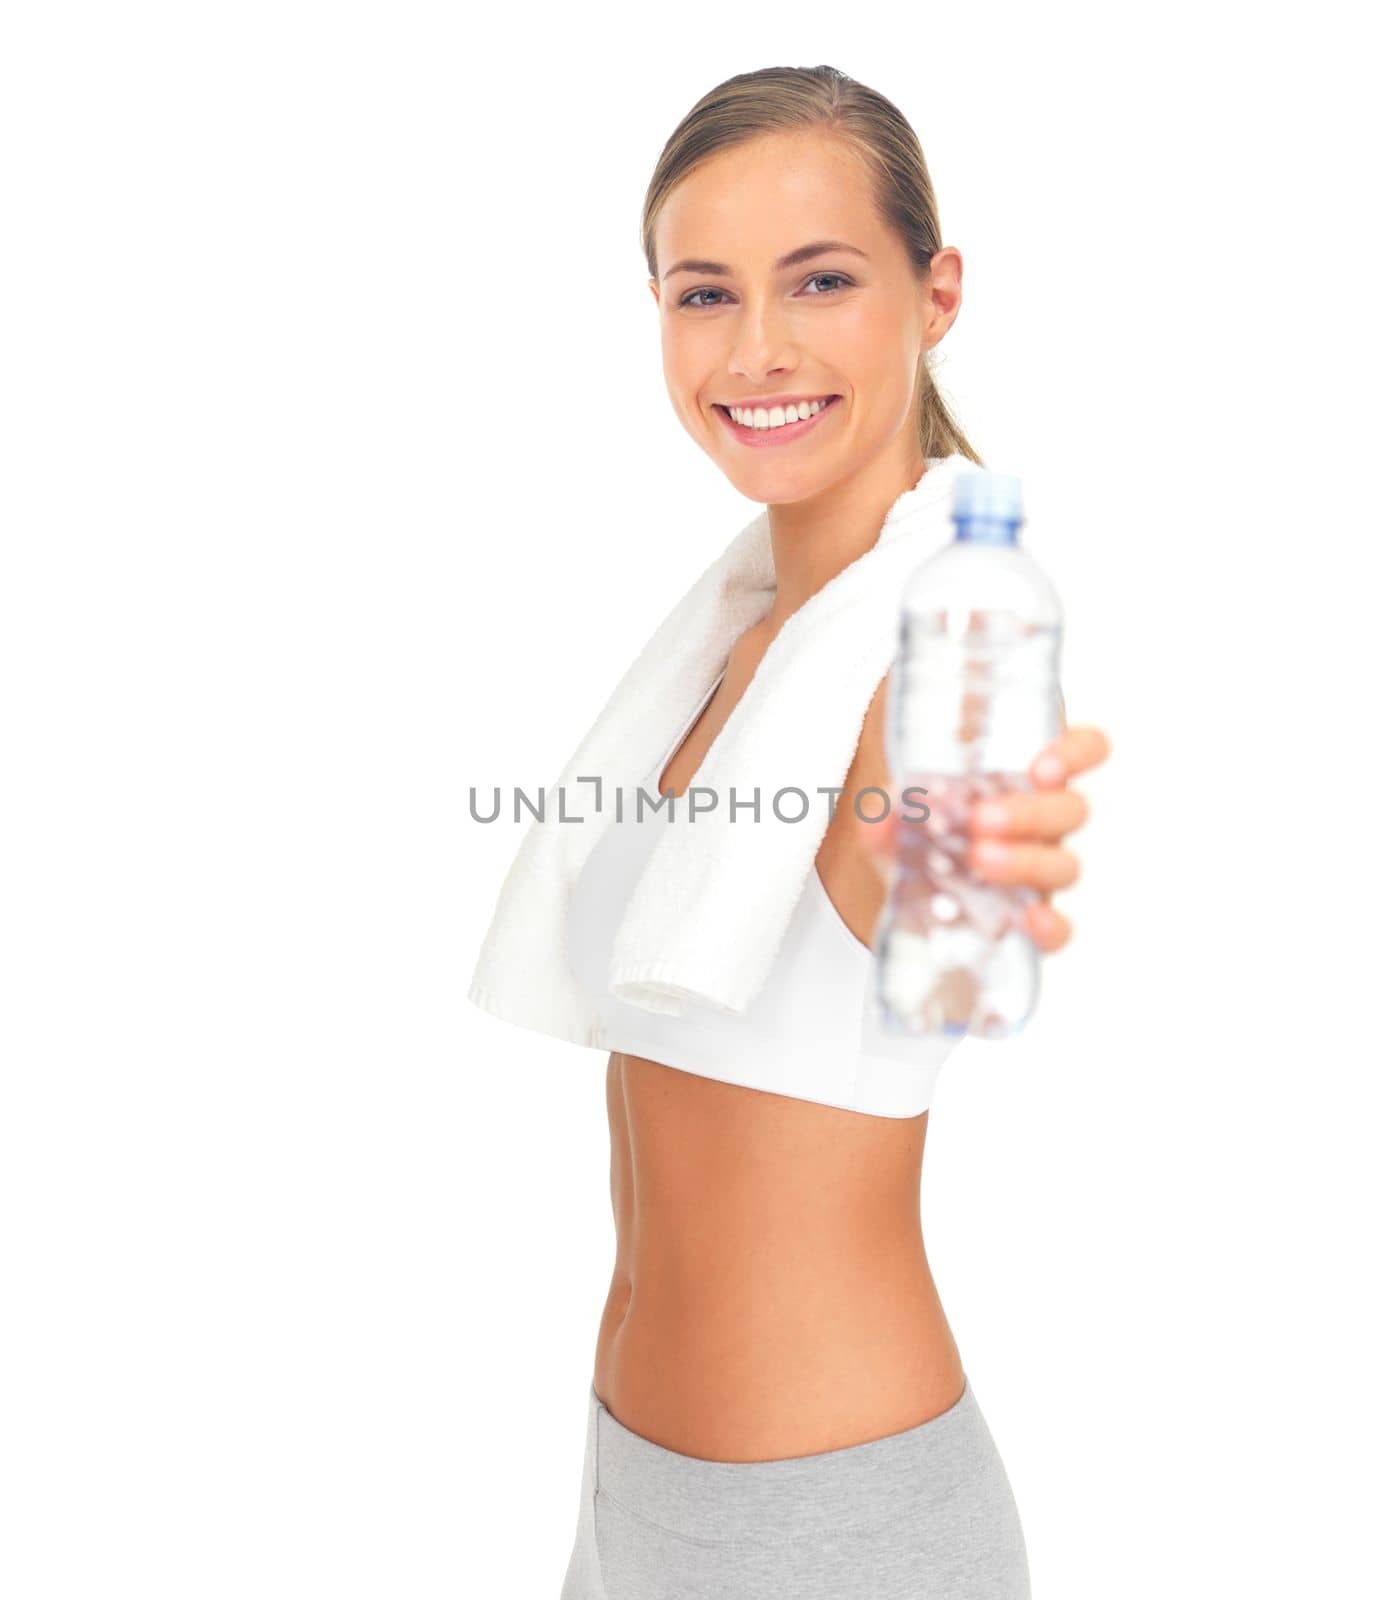 Studio, fitness woman and water bottle for health, diet workout and training motivation or offer. Liquid, nutrition and sports athlete mockup with hand holding product, isolated on white background.